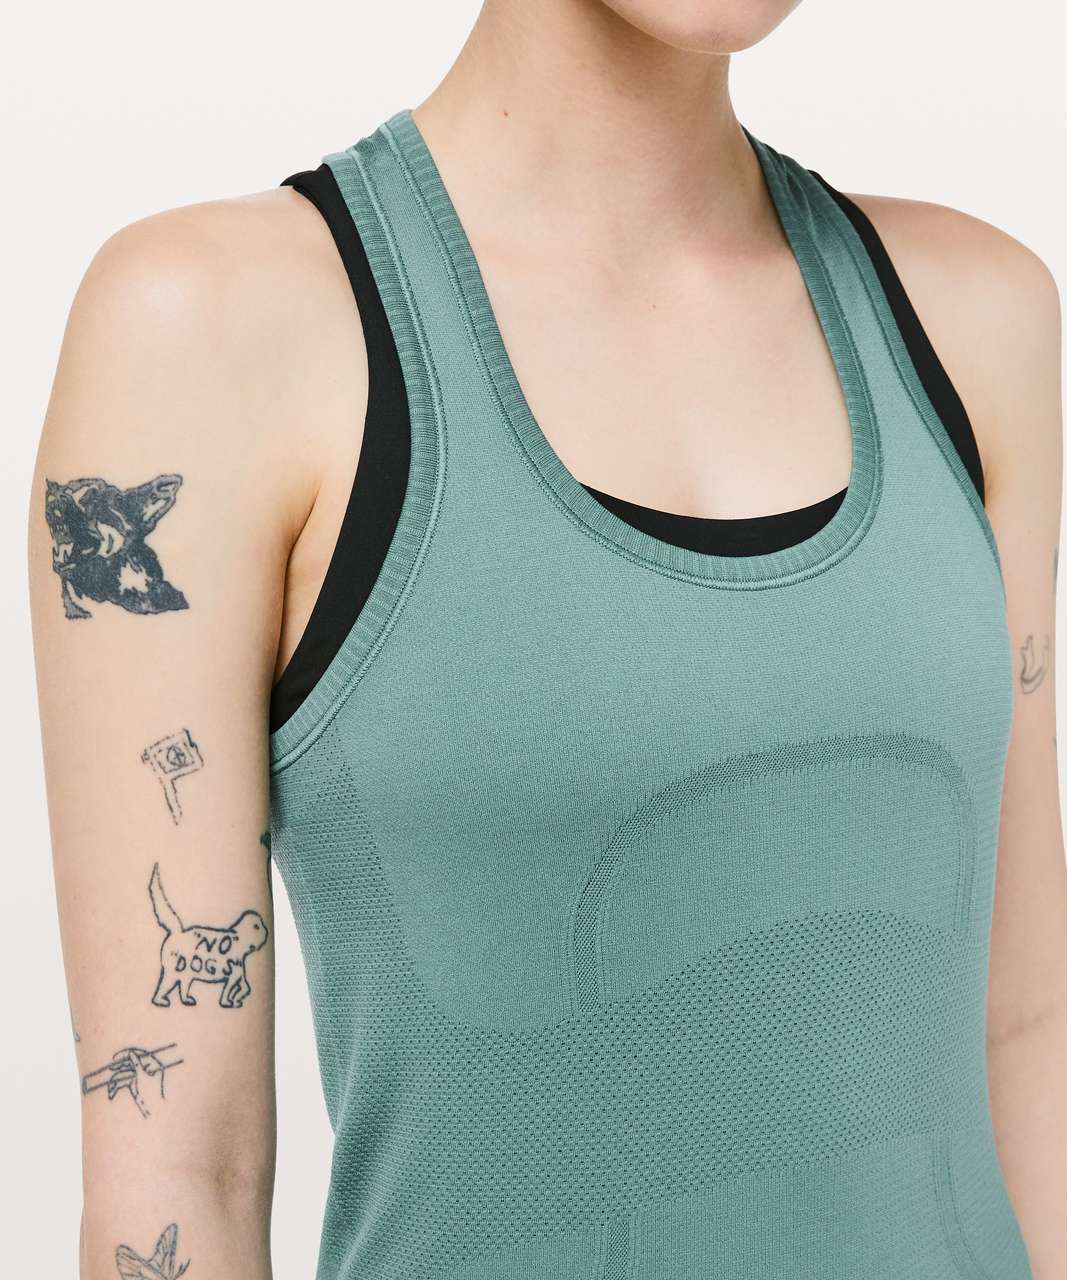 Lululemon Swiftly Tech Racerback - Frosted Pine / Frosted Pine